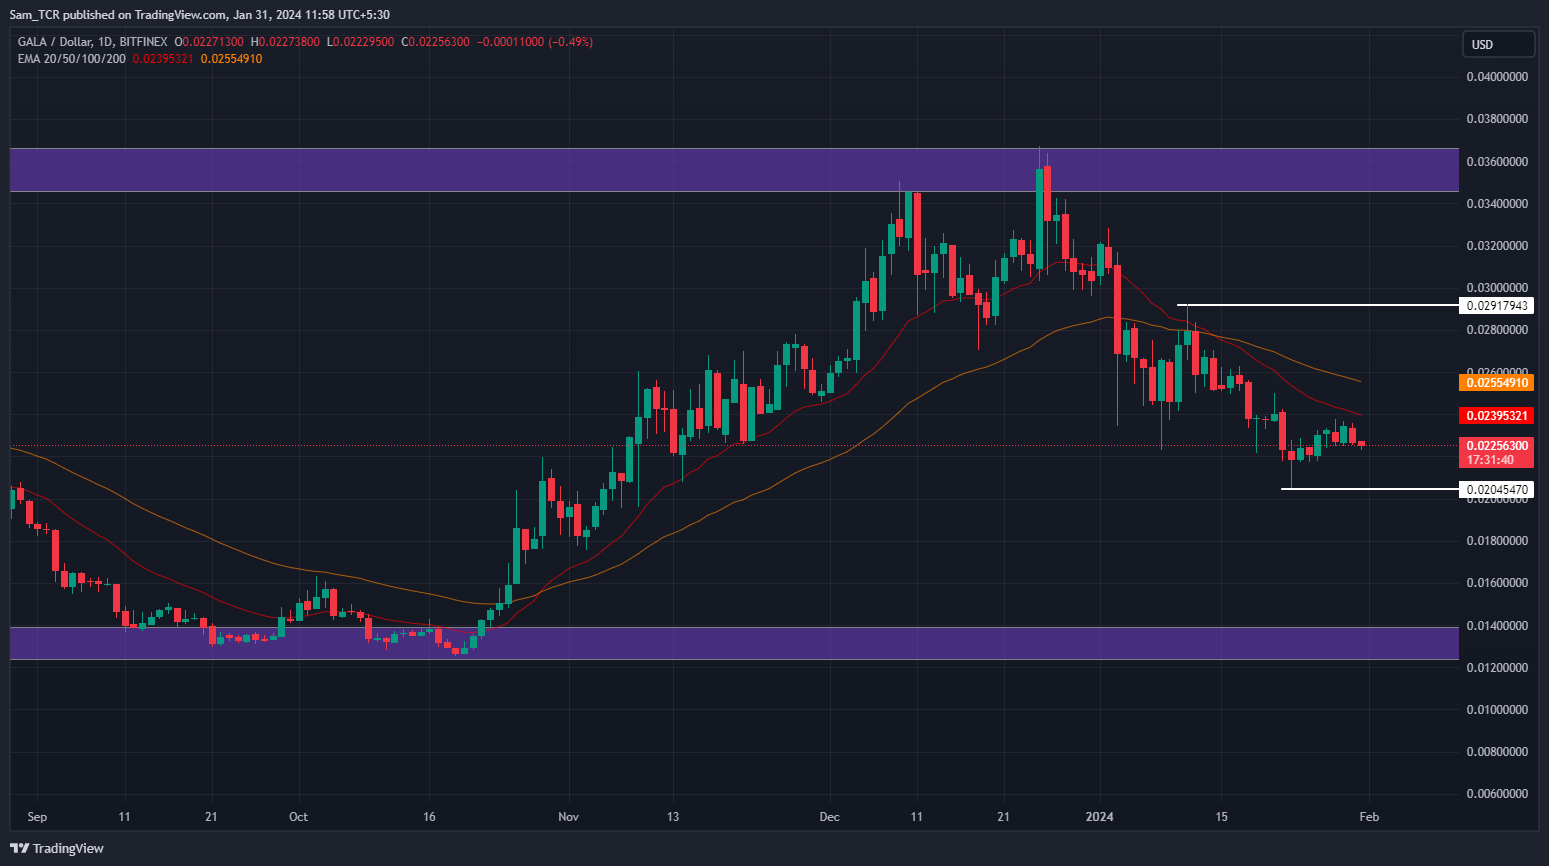 Will GALA Crypto Continue on The Overall Bullish Trend?